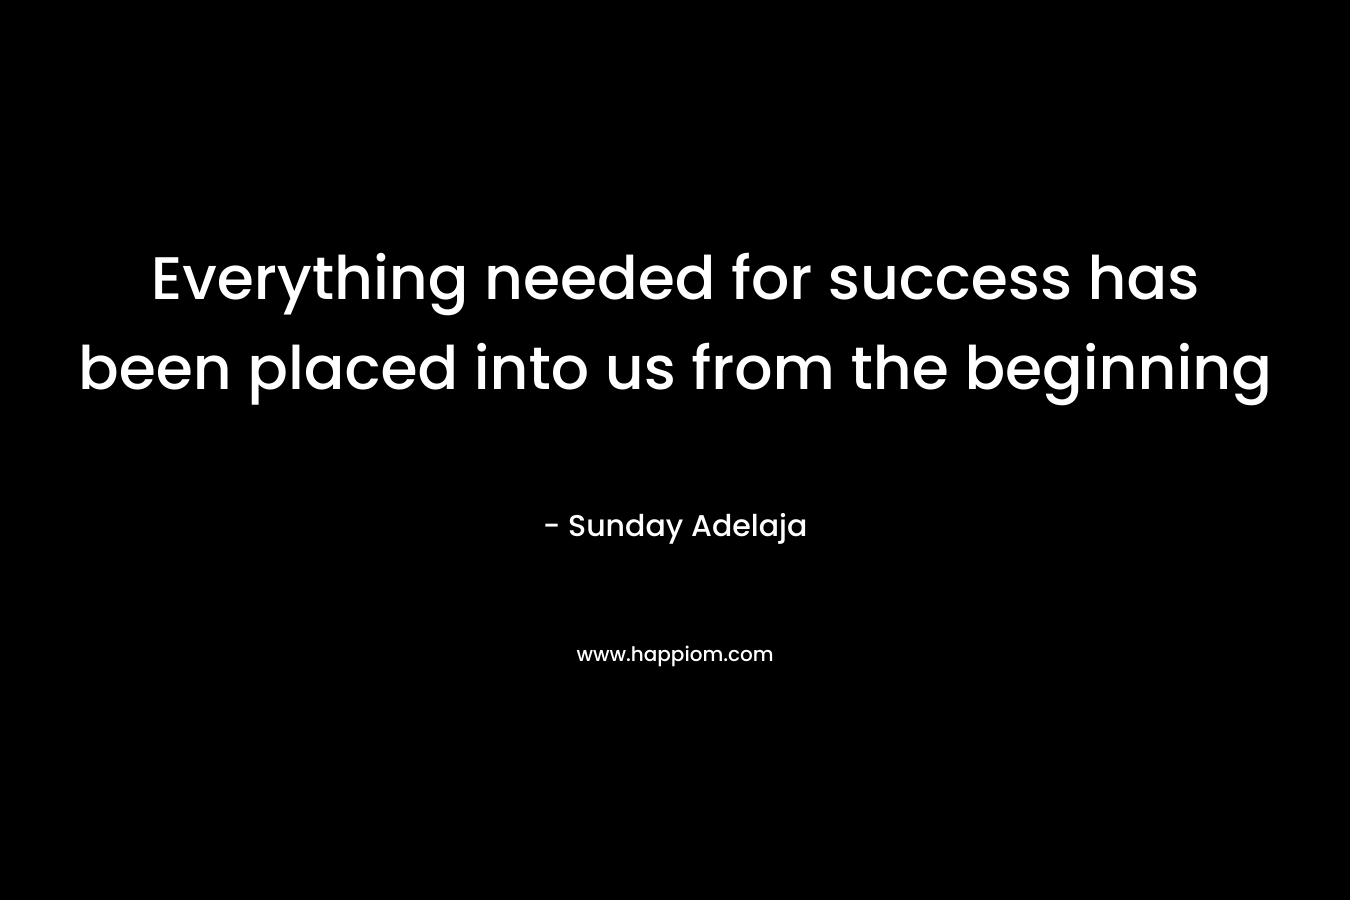 Everything needed for success has been placed into us from the beginning